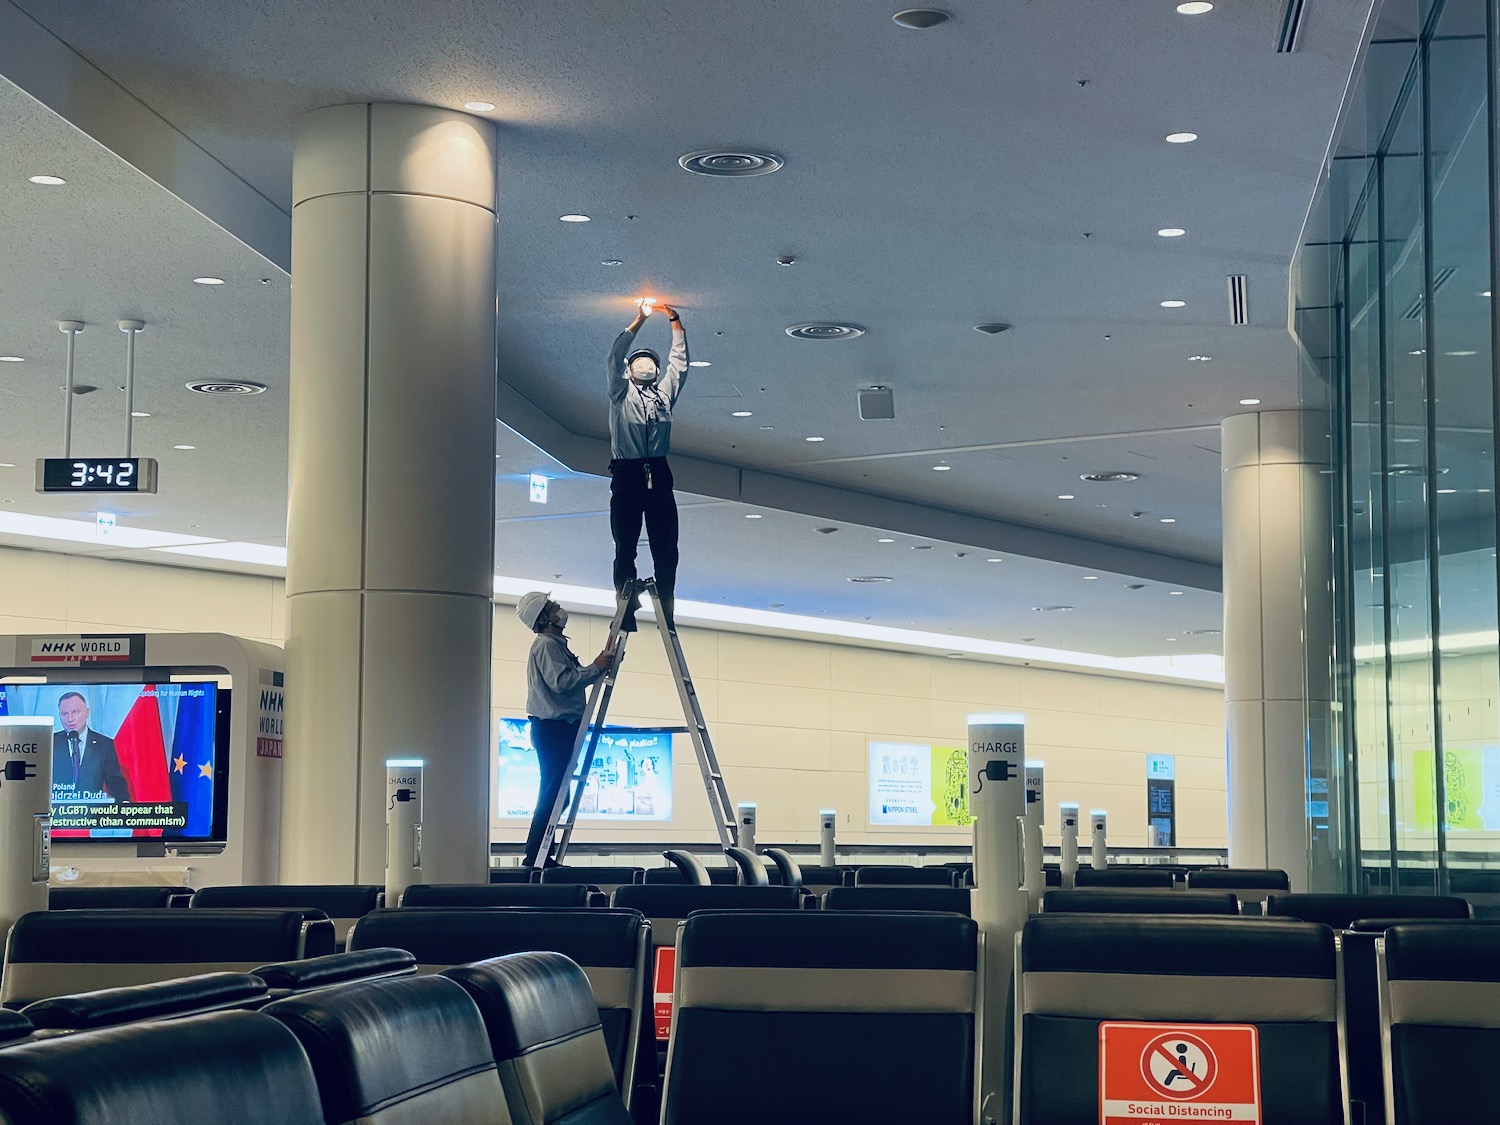 a man on a ladder in an airport